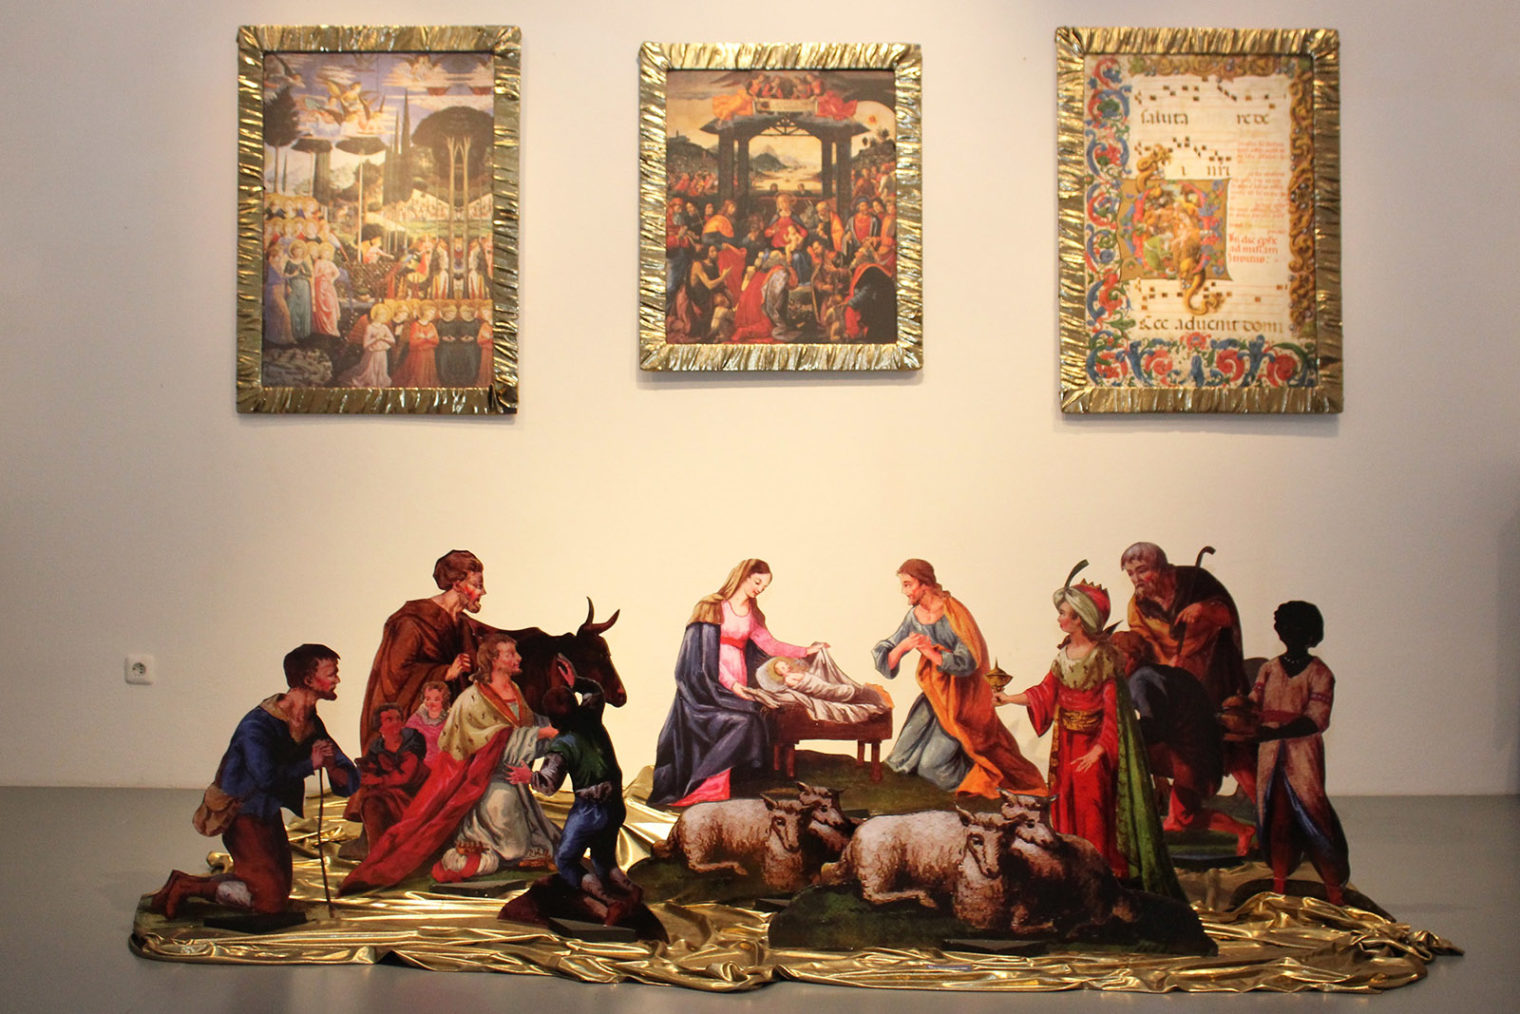 paper nativity sets at the Nativity scenes exhibition 2017